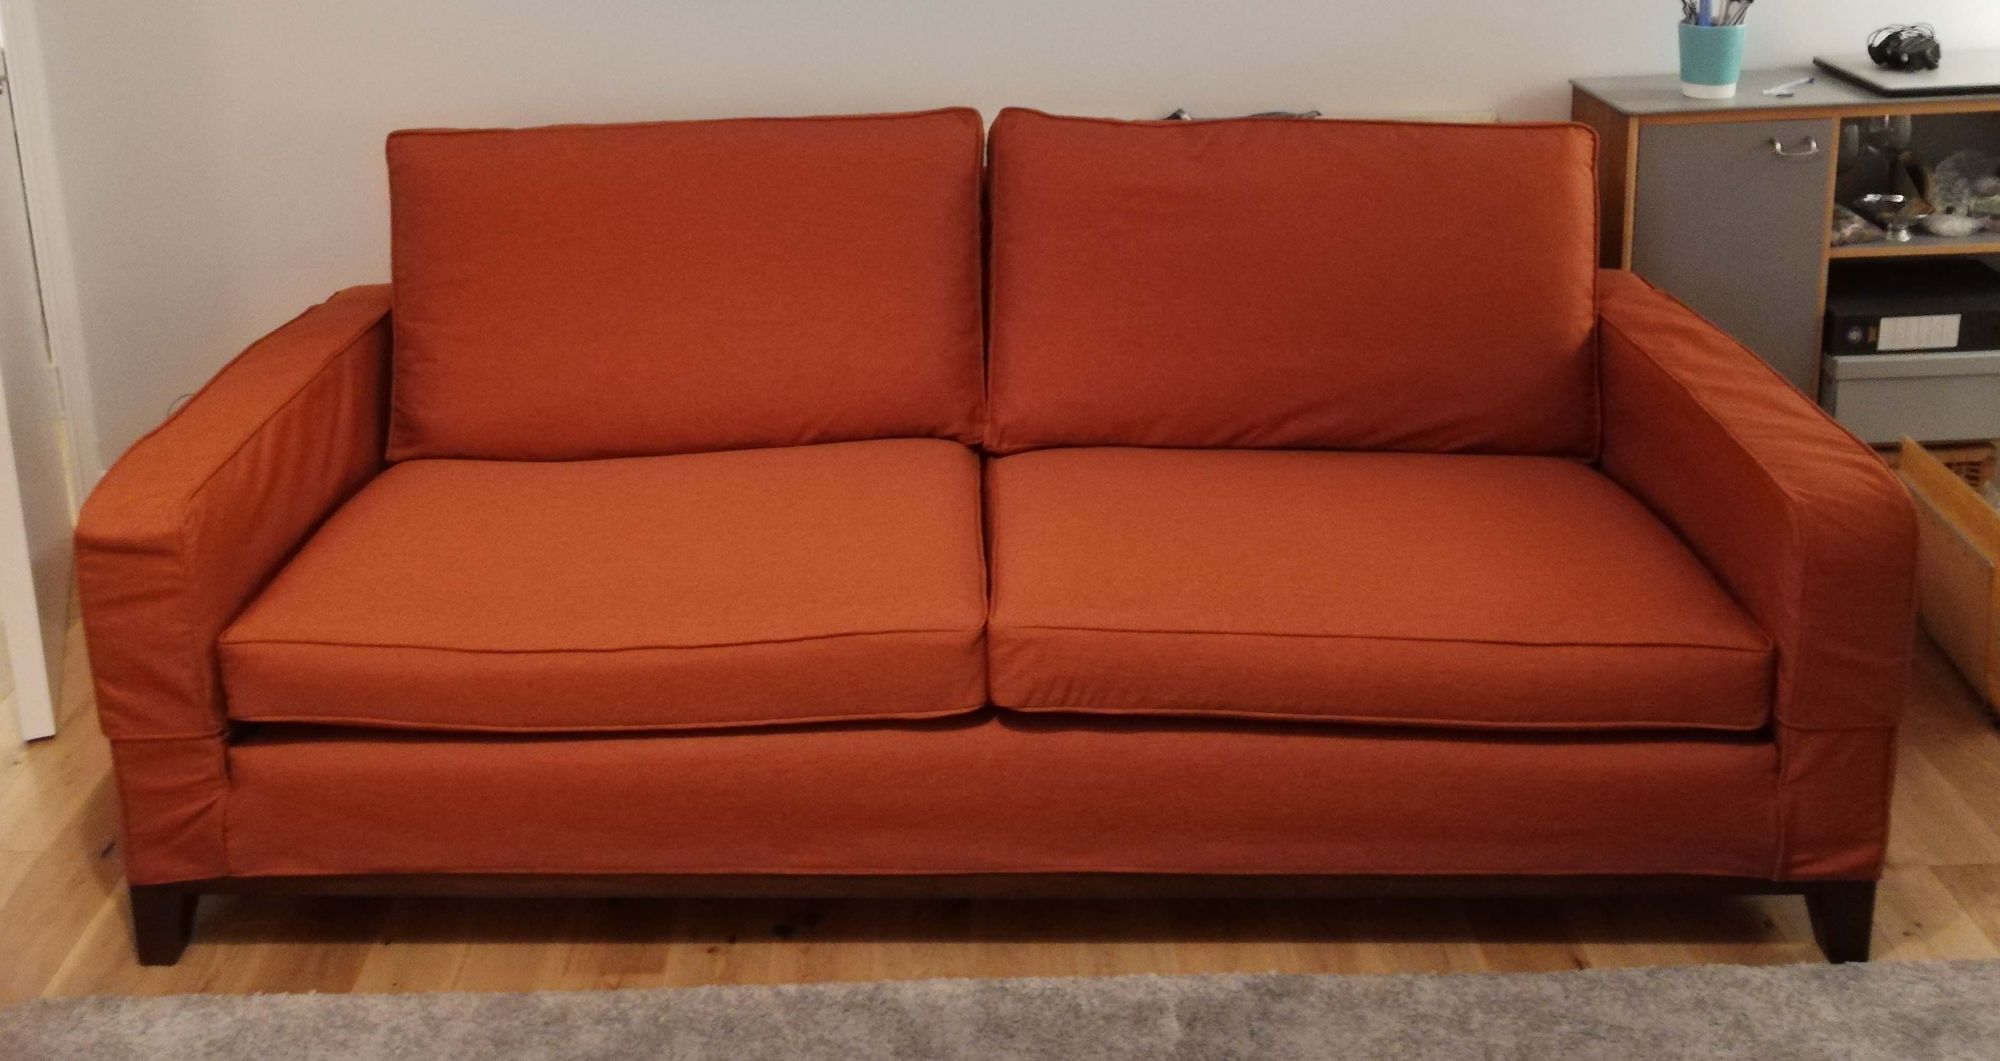 Sofa cover with piping